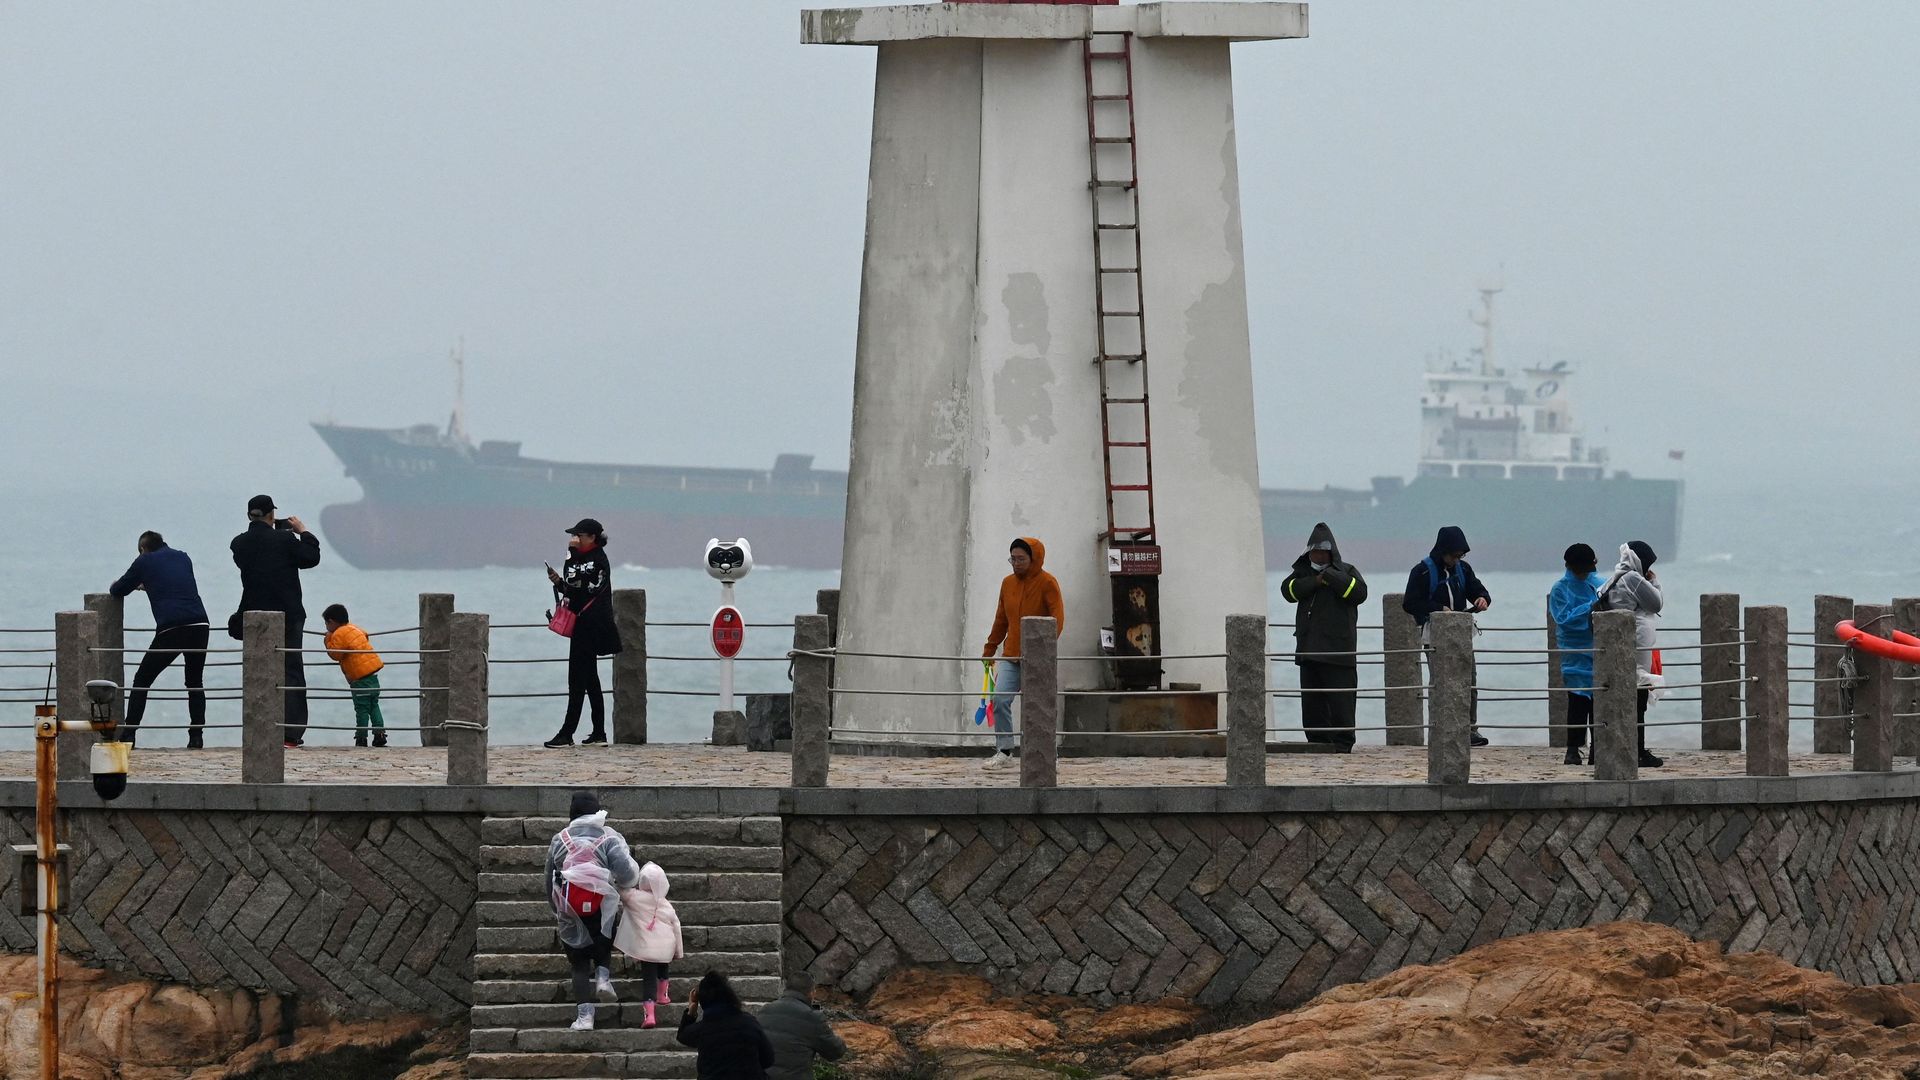 A cargo sails in the Taiwan Strait, behind tourists on a lighthouse on Pingtan island, the closest point to Taiwan, in China's southeast Fujian province on April 6.